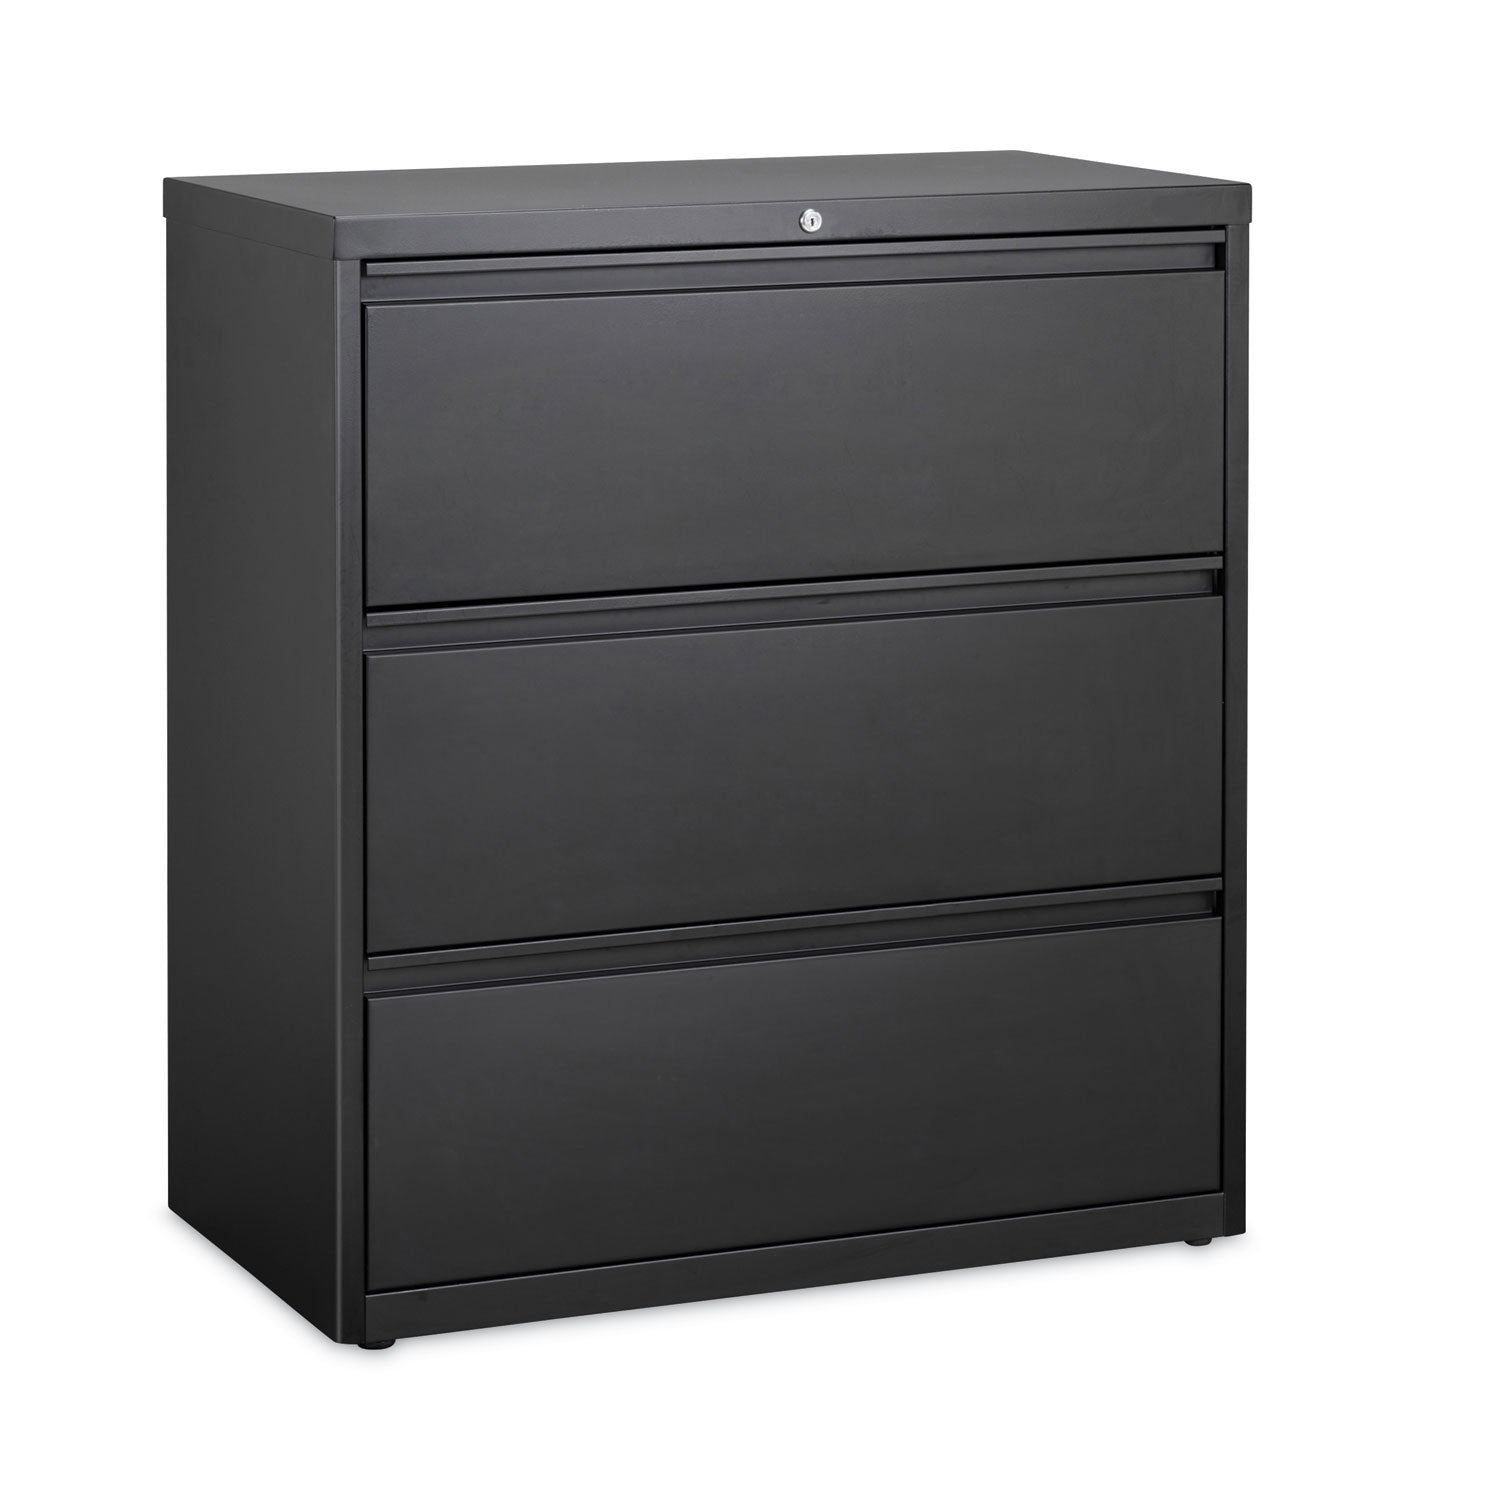 lateral-file-cabinet-3-letter-legal-a4-size-file-drawers-black-36-x-1862-x-4025_hid14986 - 1